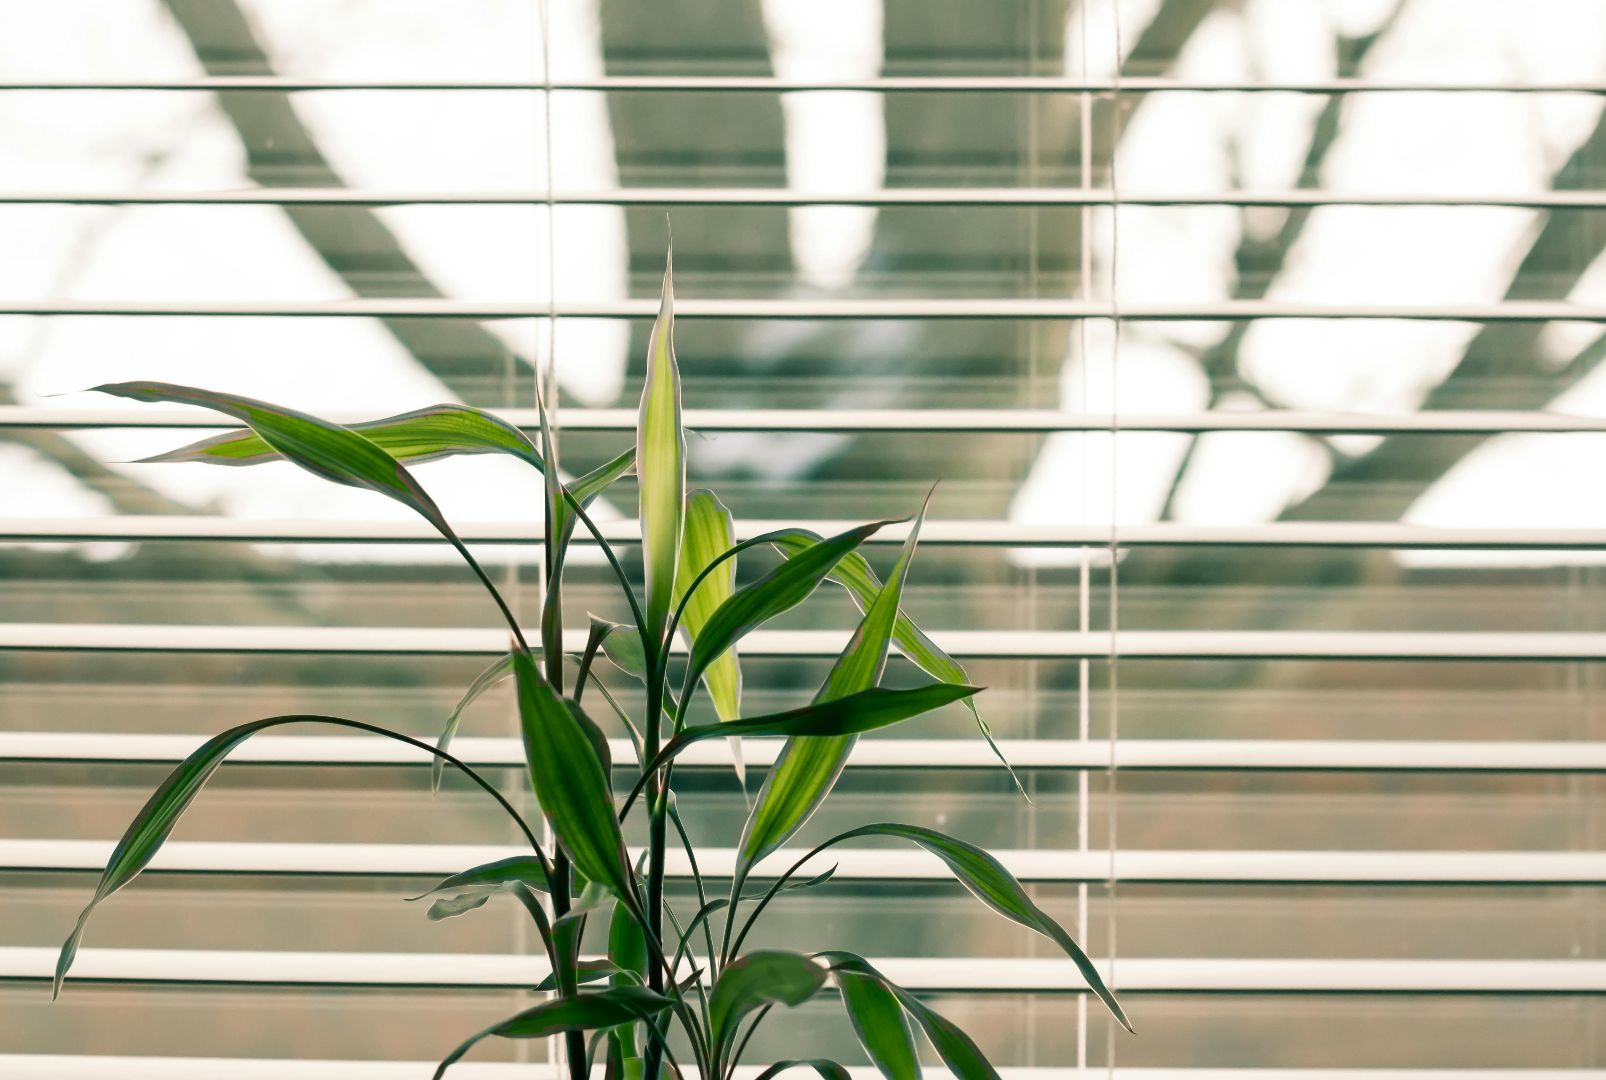 Plant in front of blind - photograph by Steve Johnson